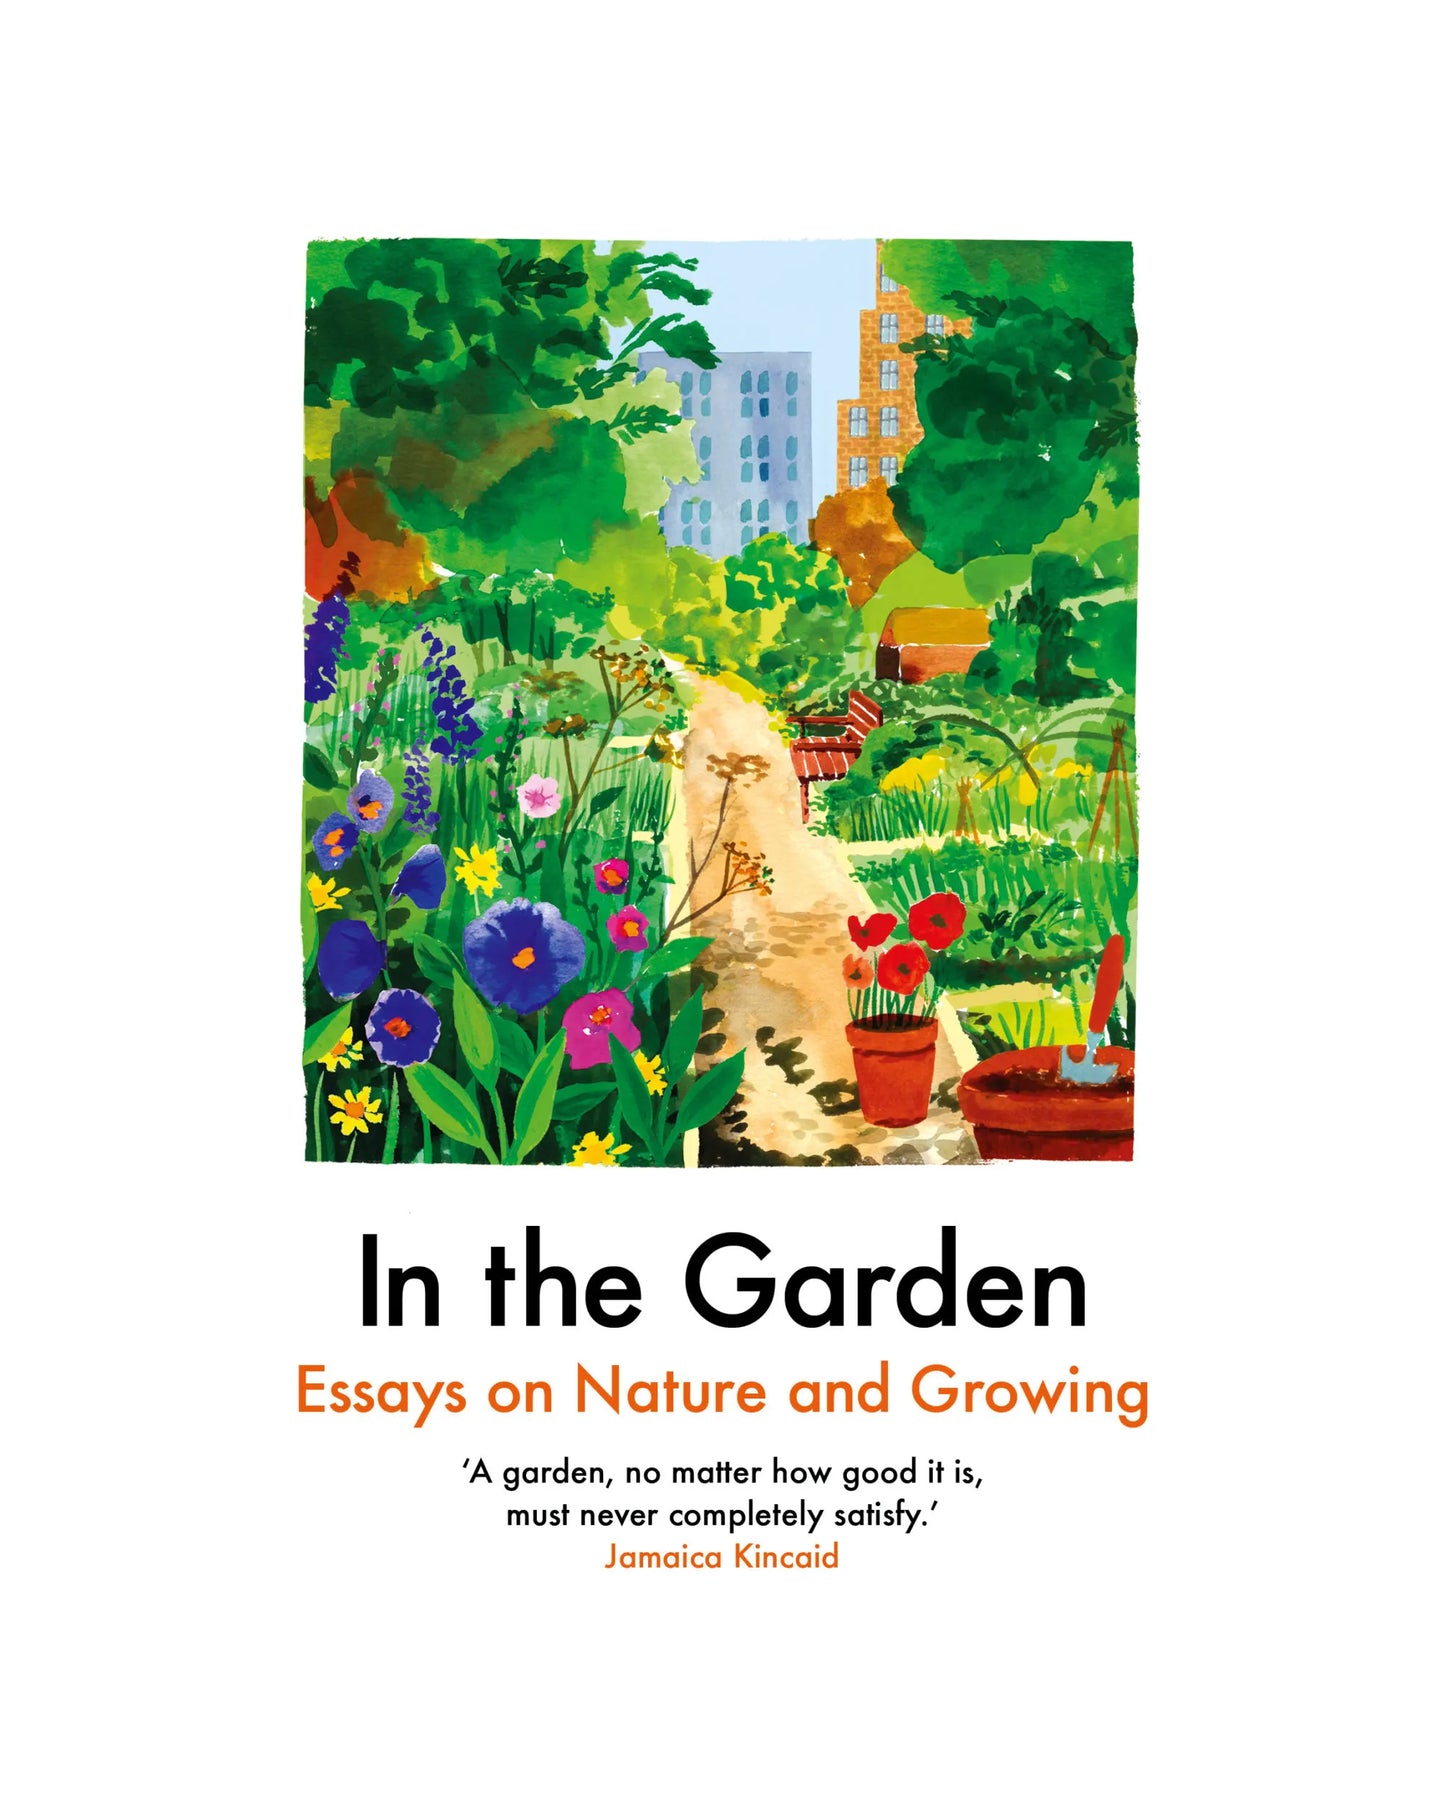 In The Garden: Essays on Nature and Growing